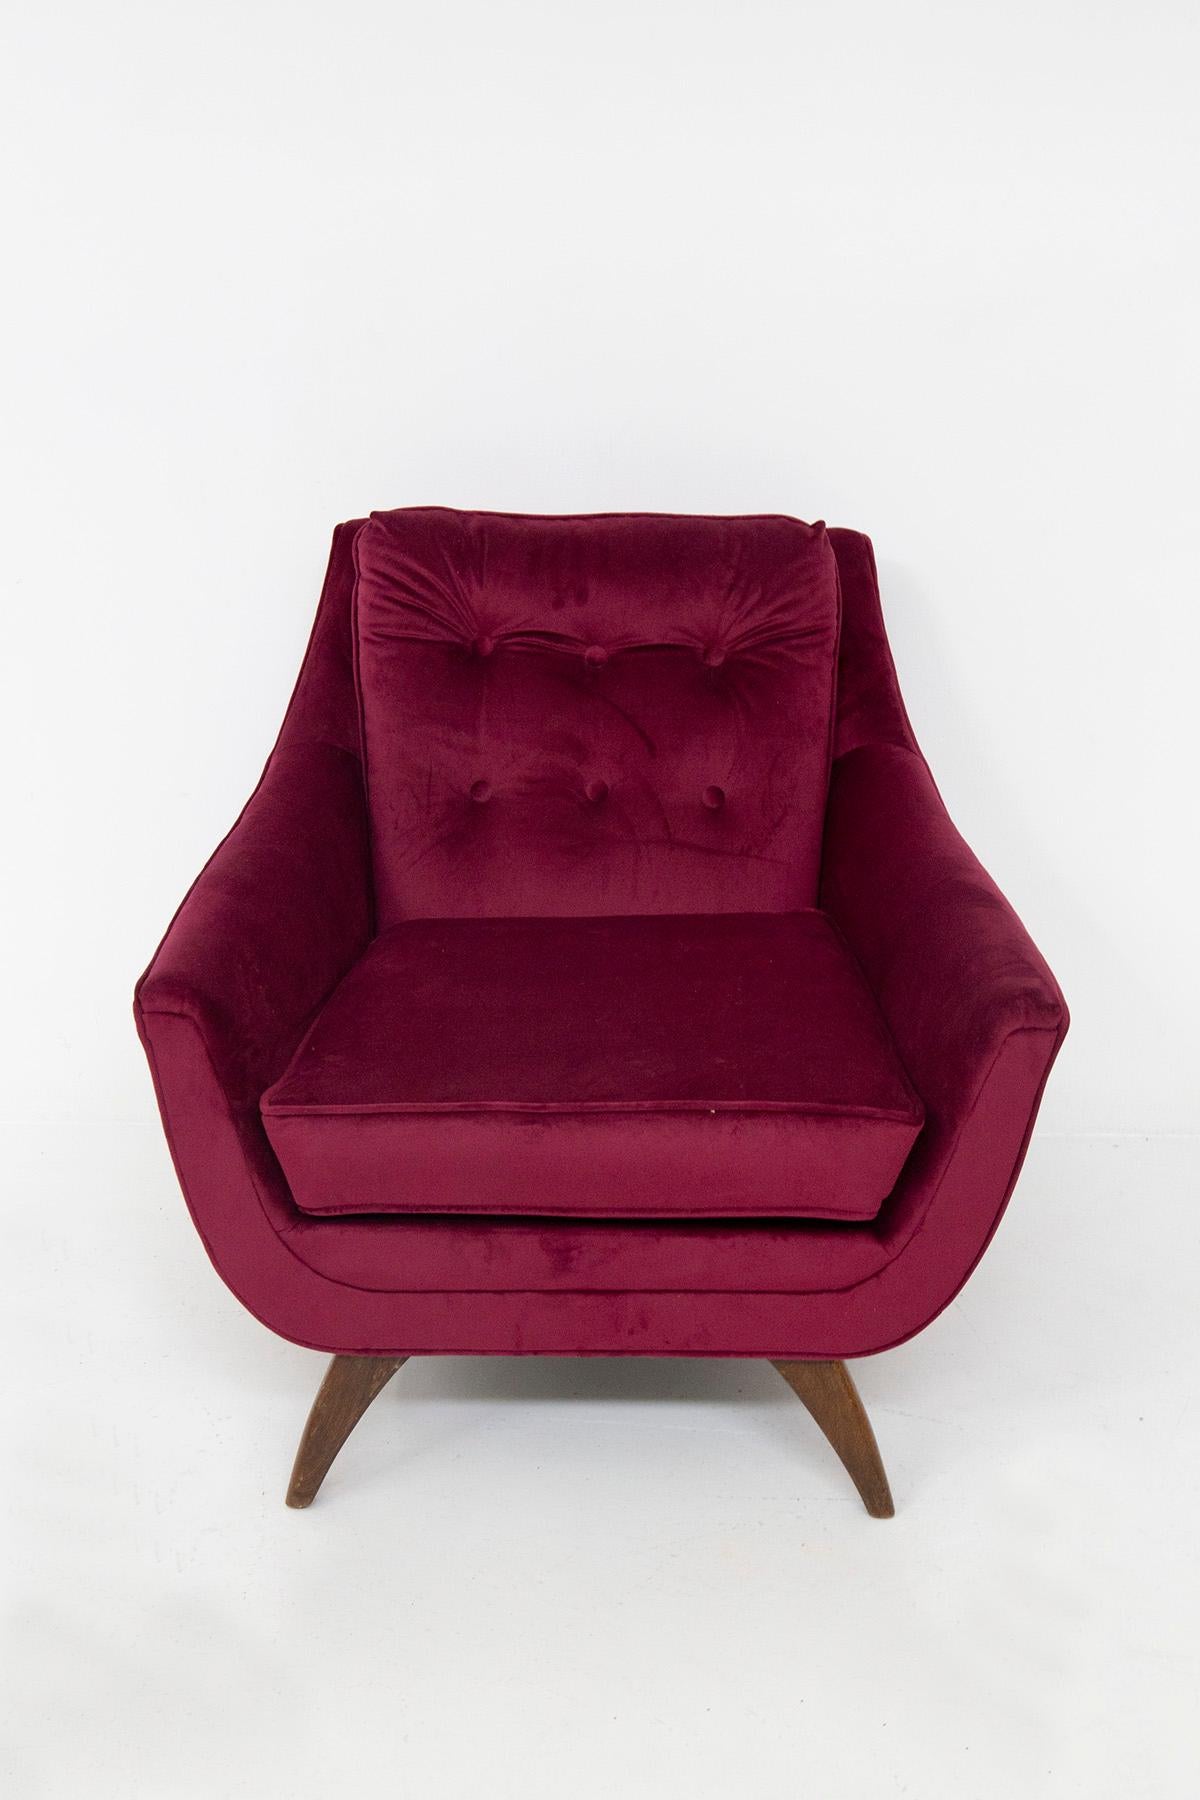 Adrian Pearsall Pair of Purple Armchairs in Velvet Him and Her For Sale 6